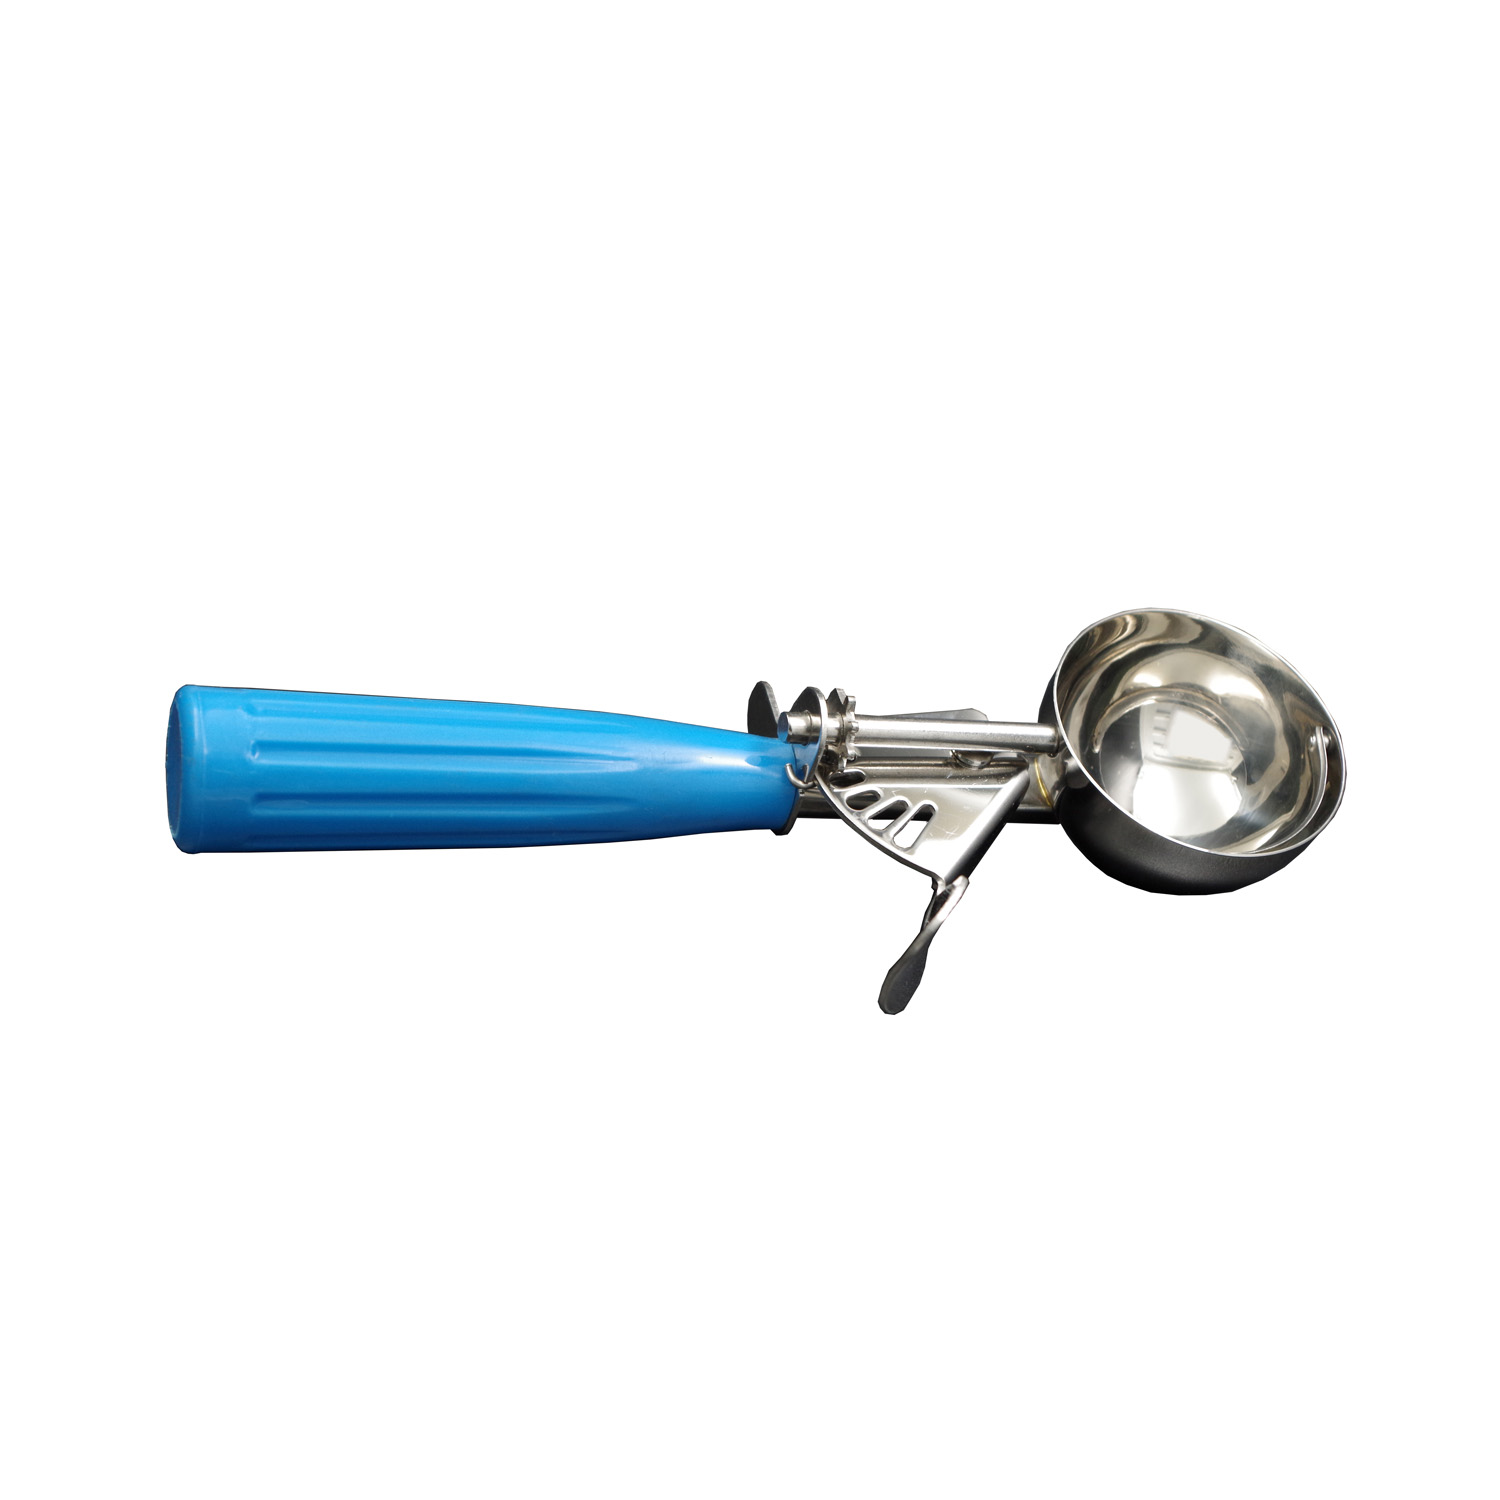 CAC China SICD-16BL Stainless Steel Thumb Disher with Royal Blue Handle 2 oz., #16